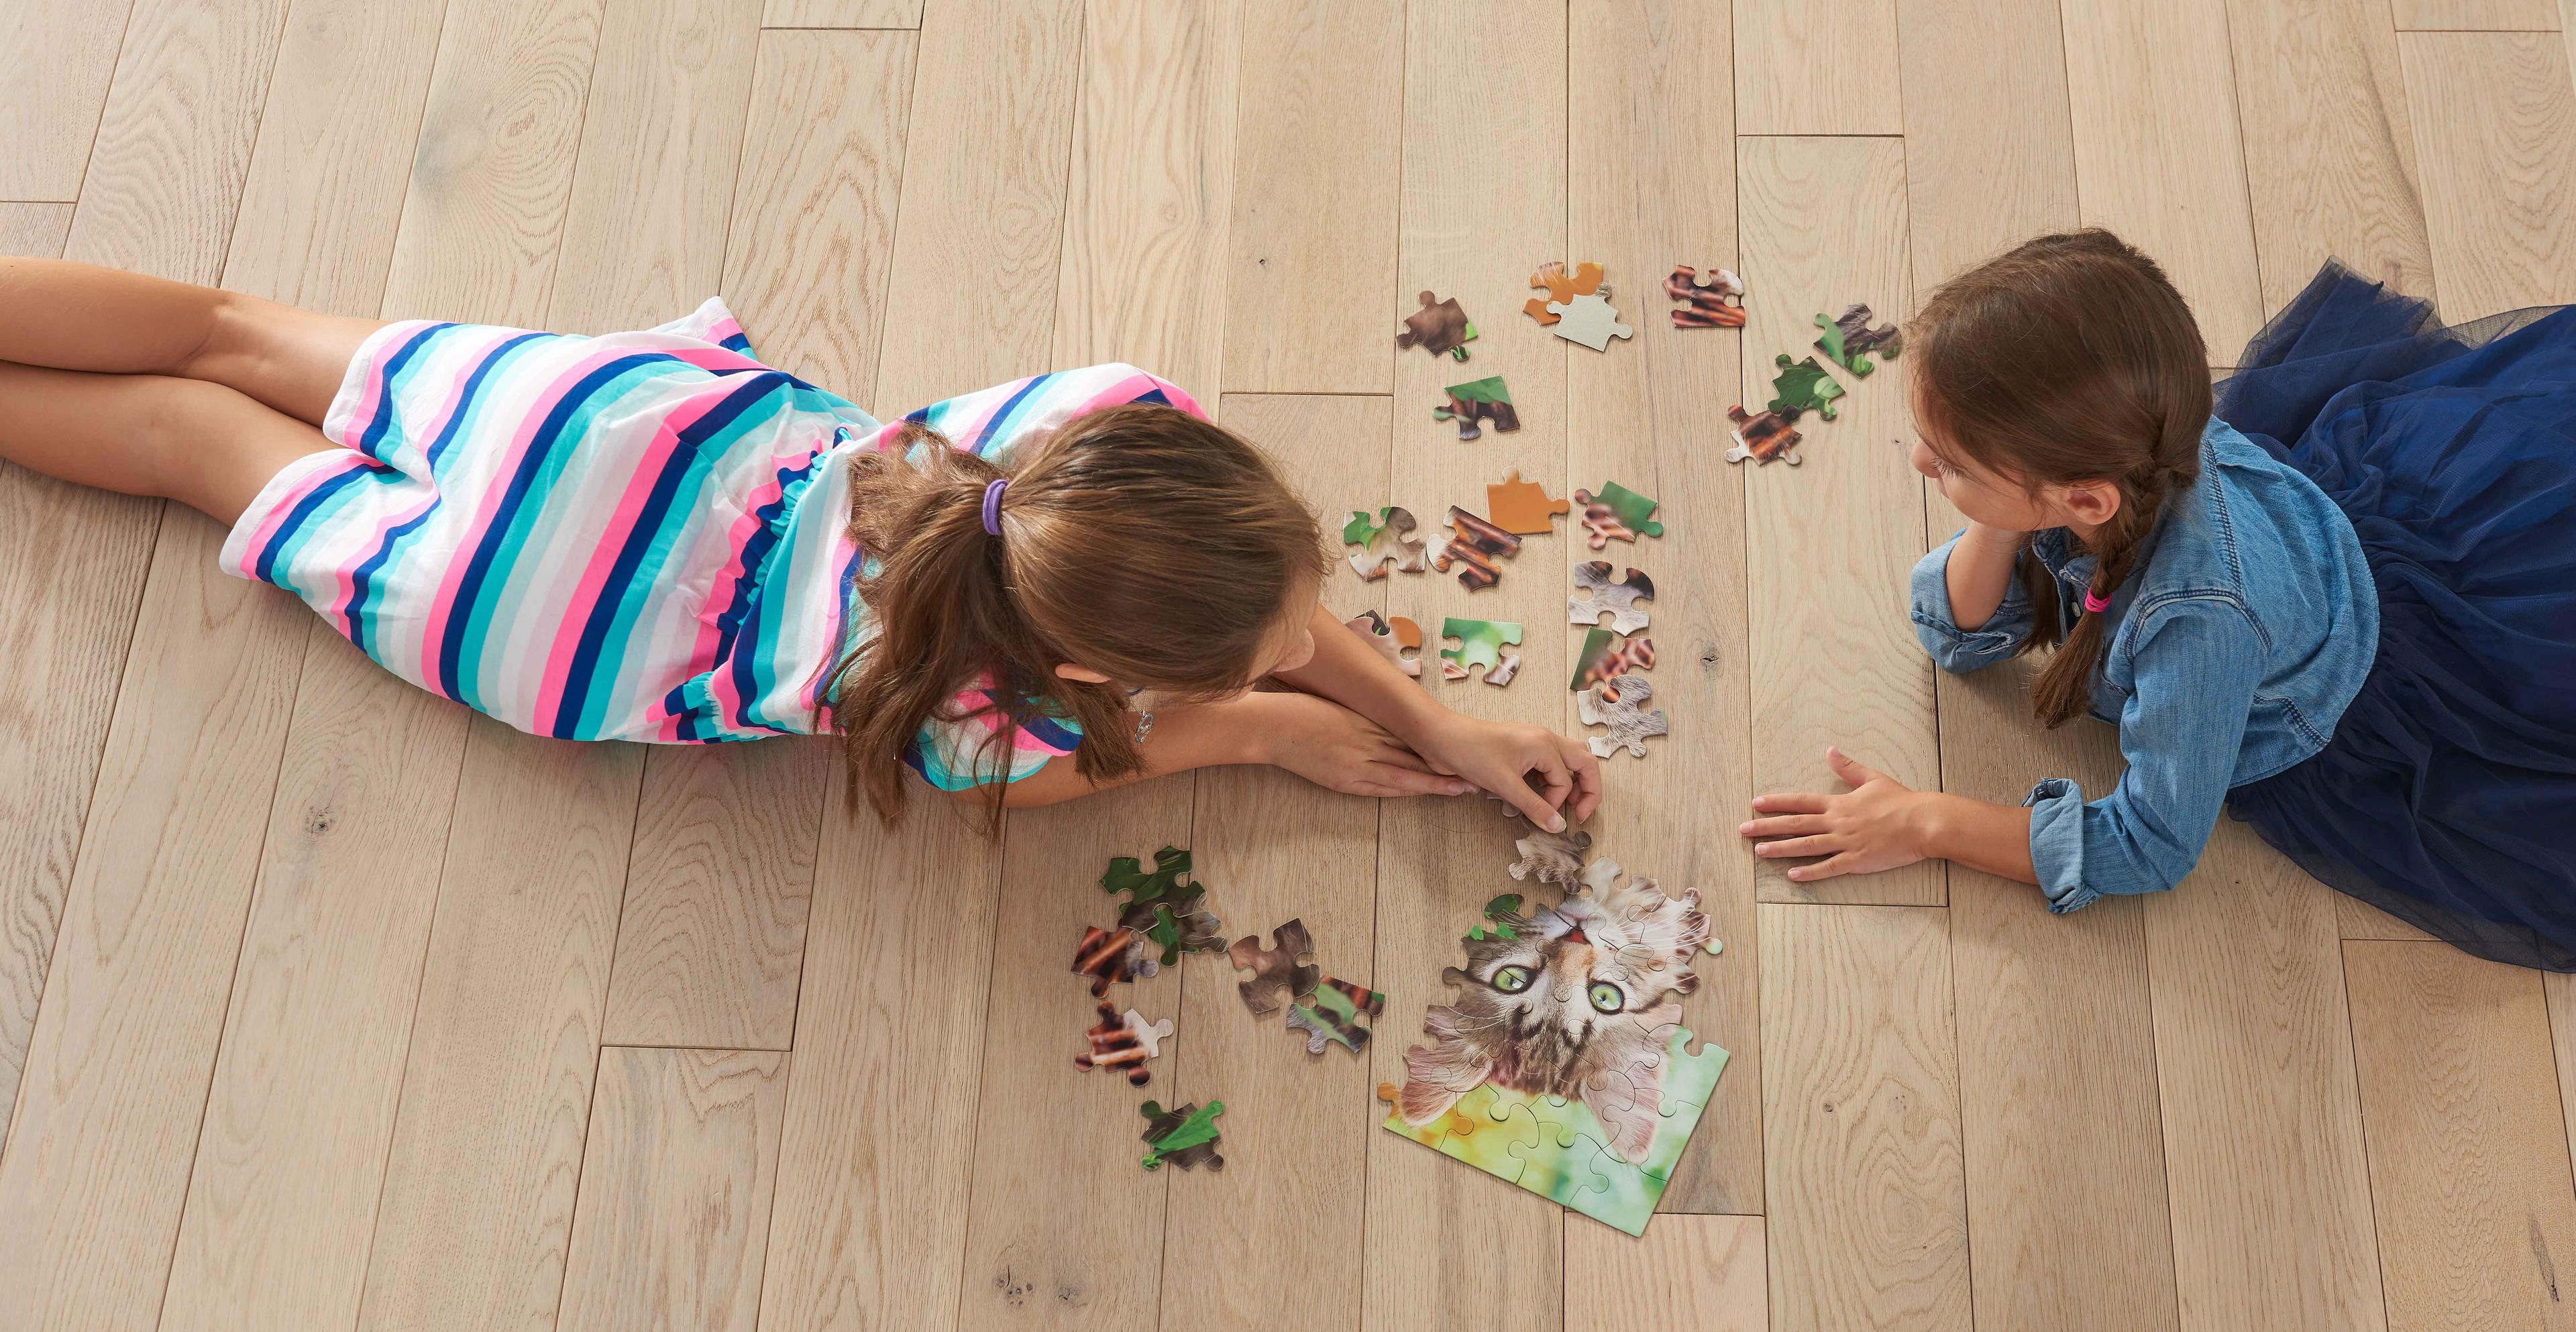 Children playing with a puzzle on hardwood floor